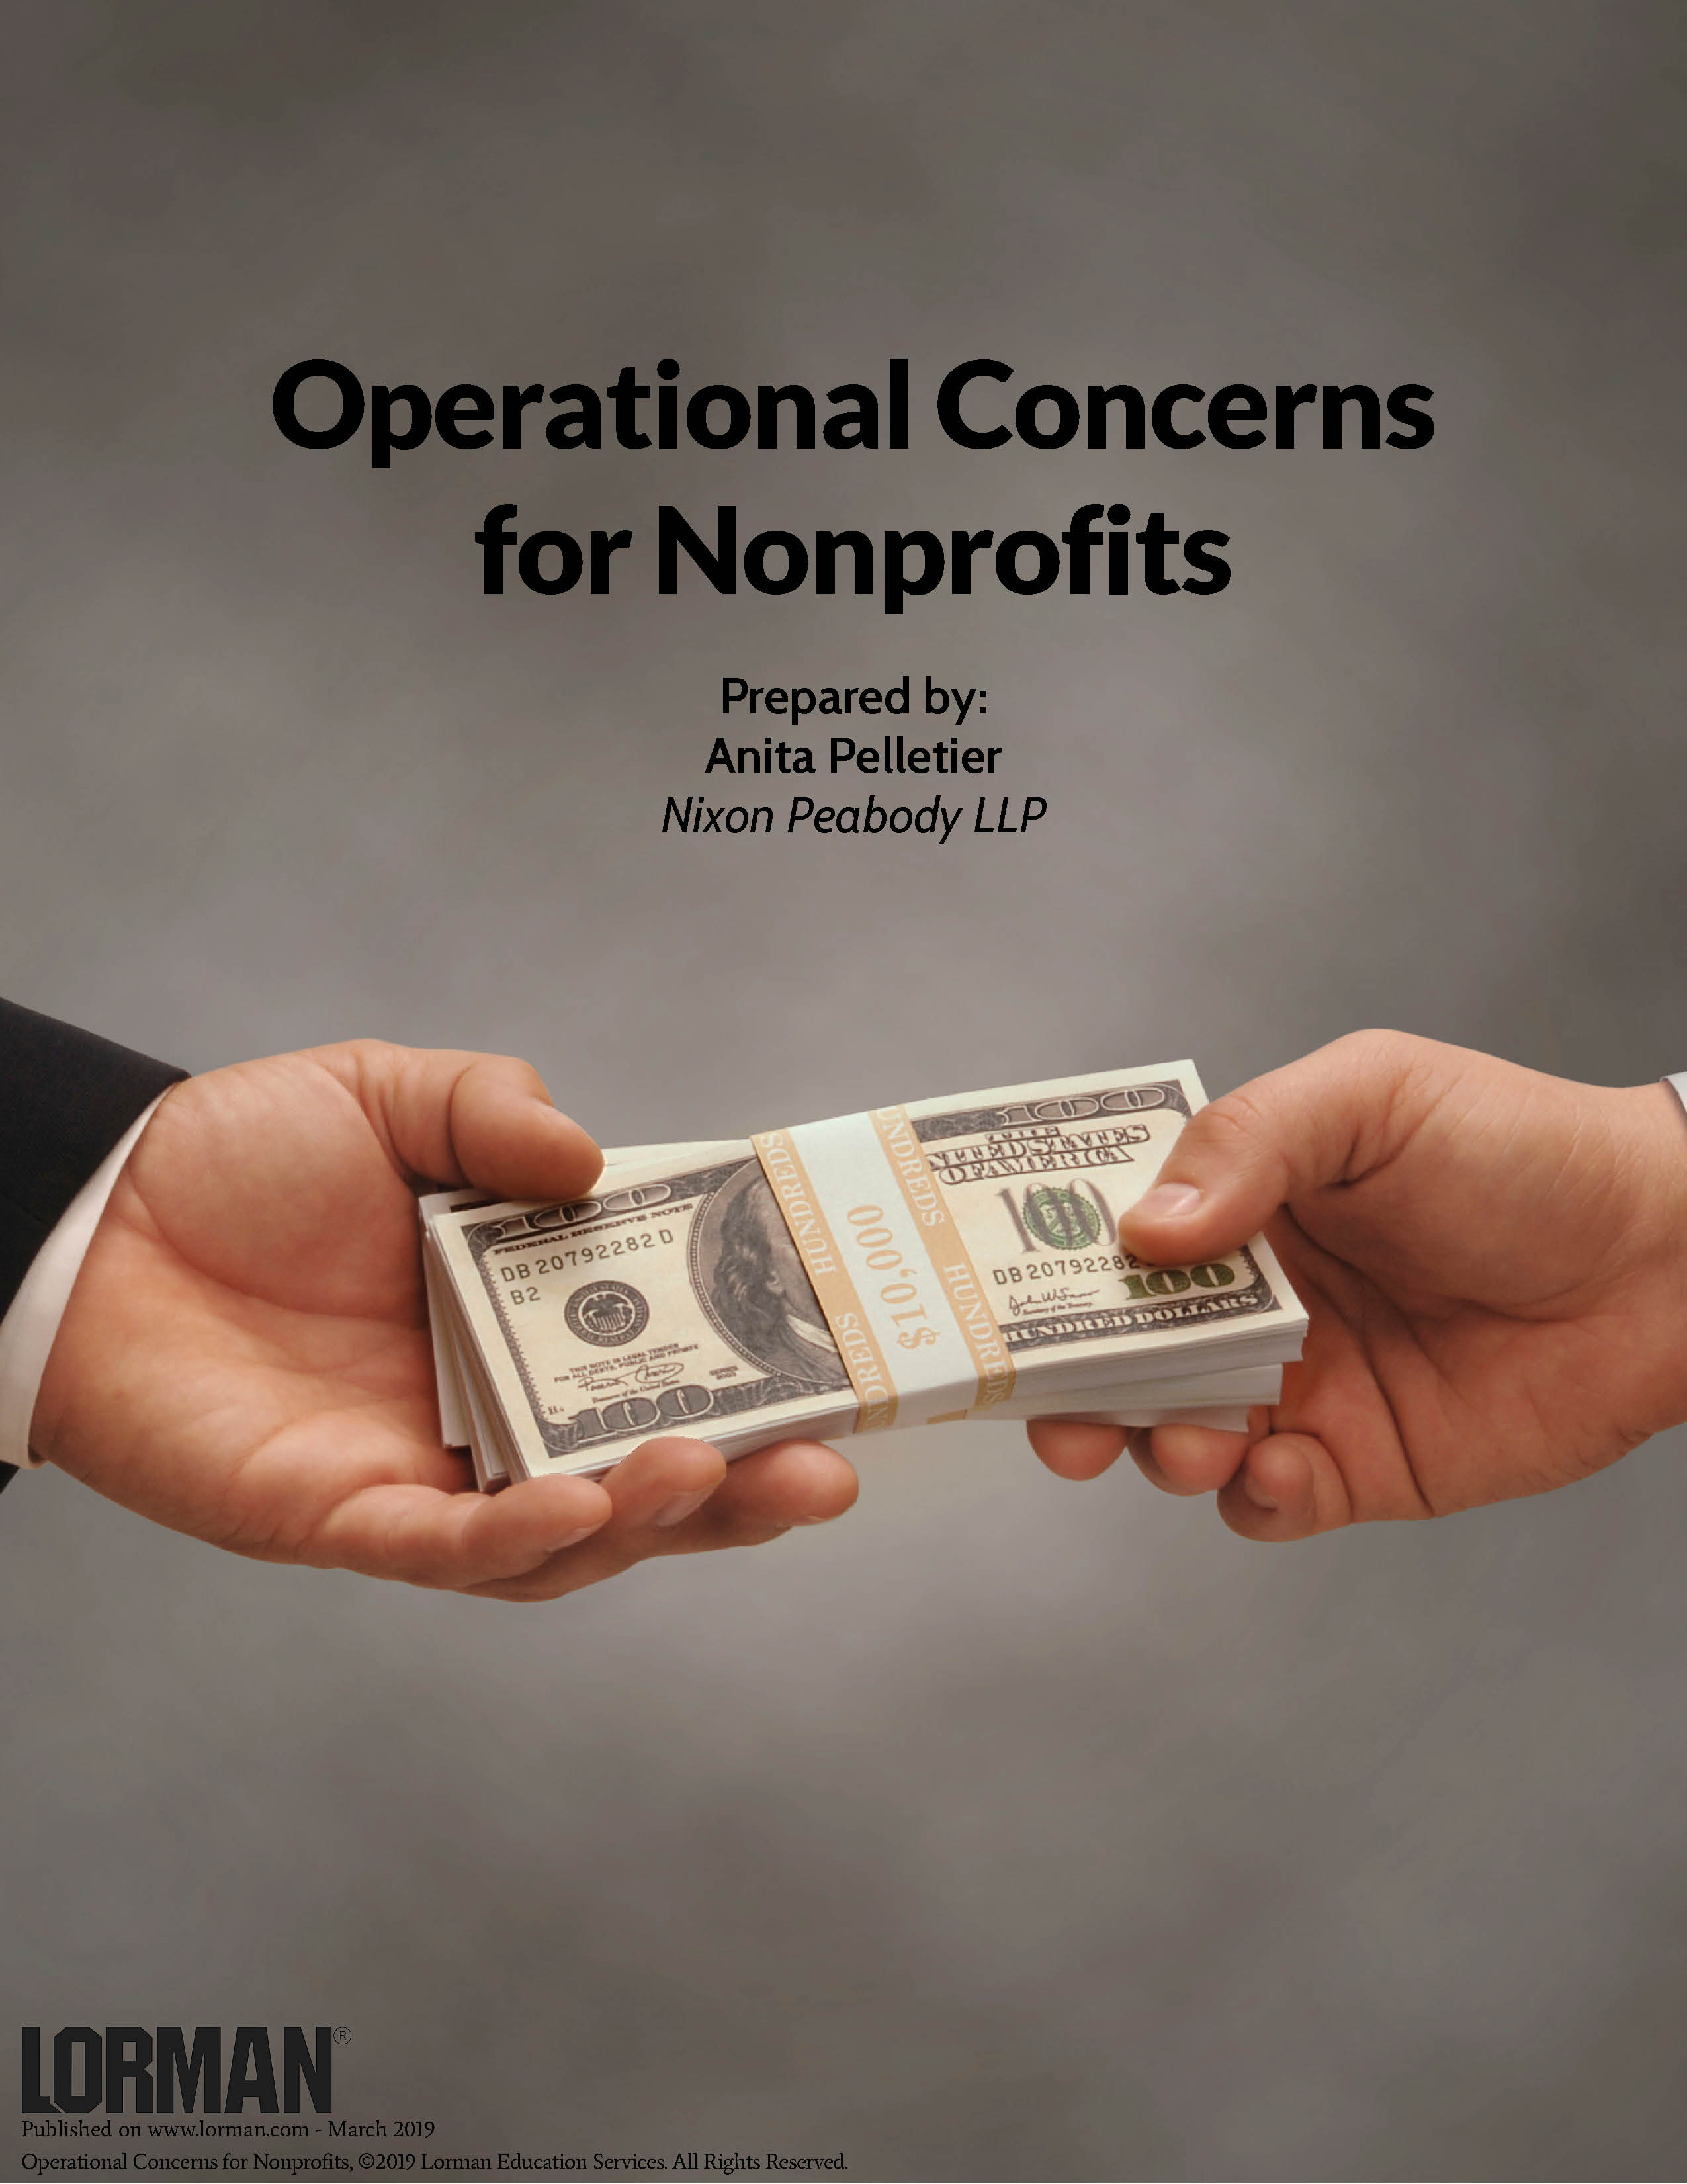 Operational Concerns for Nonprofits